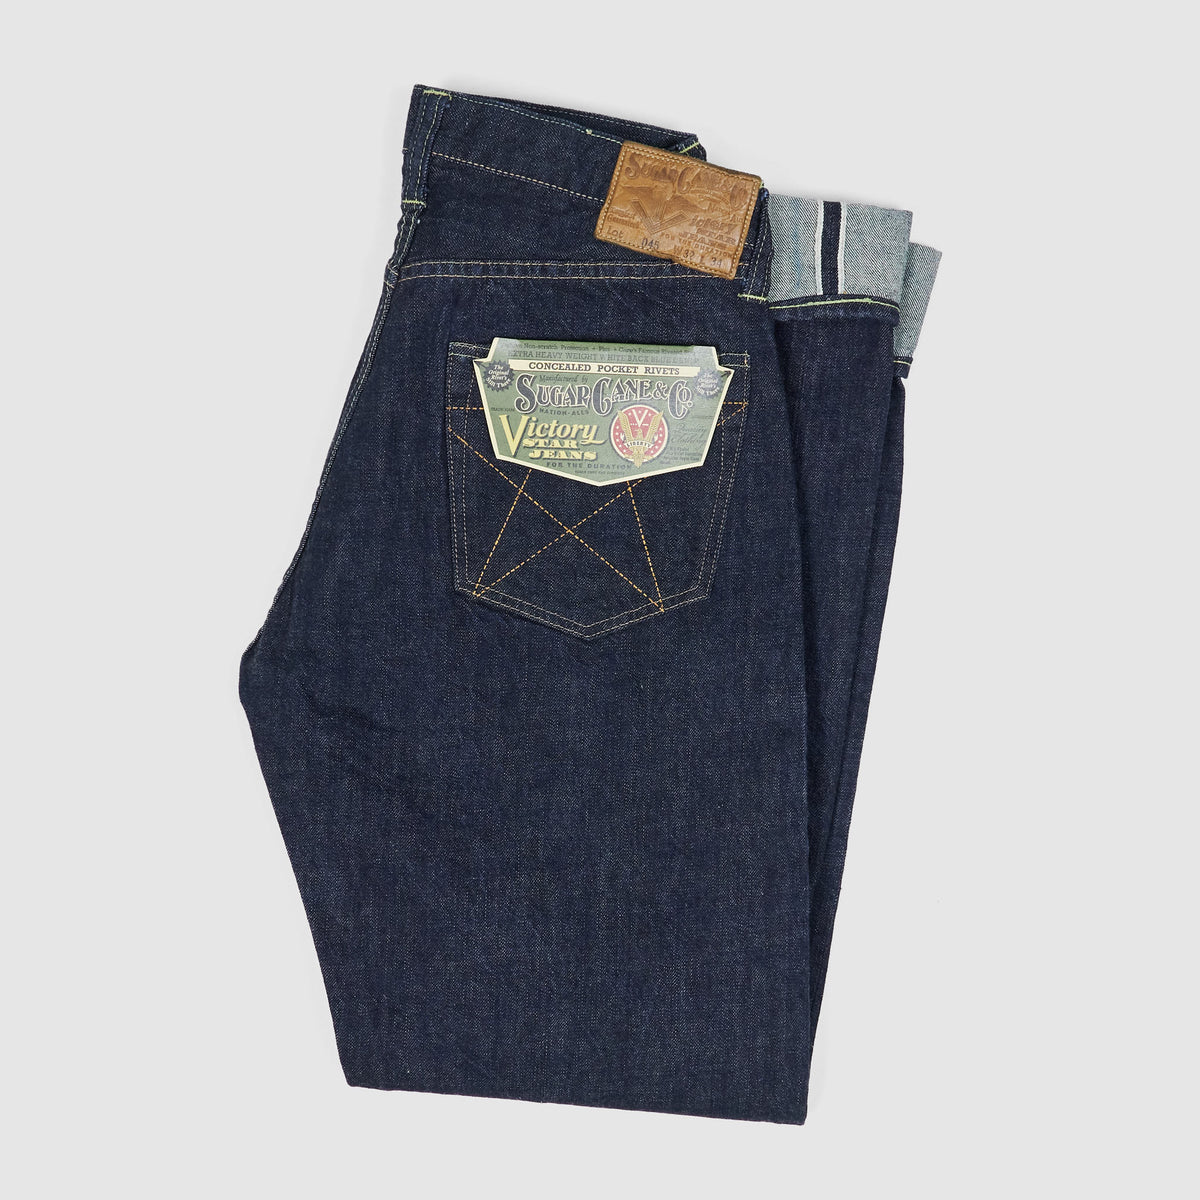 Sugar Cane WW2 Victory Star Selvage Denim Jeans - DeeCee style